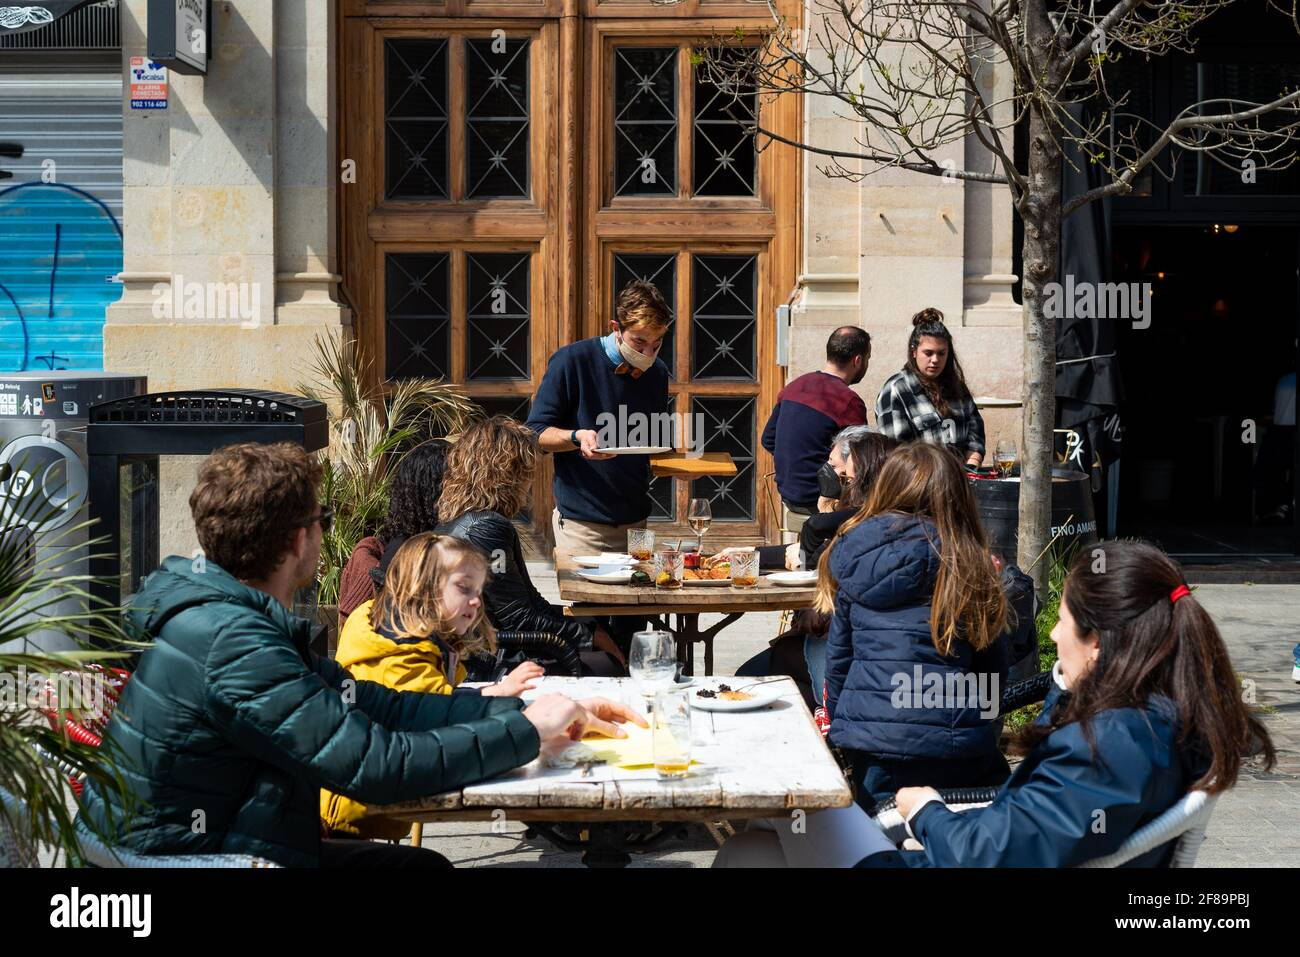 People sit in open air terrace of a restaurant in the Gothic quarter of Barcelona, Spain on March 27, 2021. Easing of covid-19 restrictions and lockdown means people can eat and drink out in public spaces. Spanish government is trying to reopen the tourism and hospitality industries to push the economic recovery (Photo by Davide Bonaldo/Sipa USA) Stock Photo